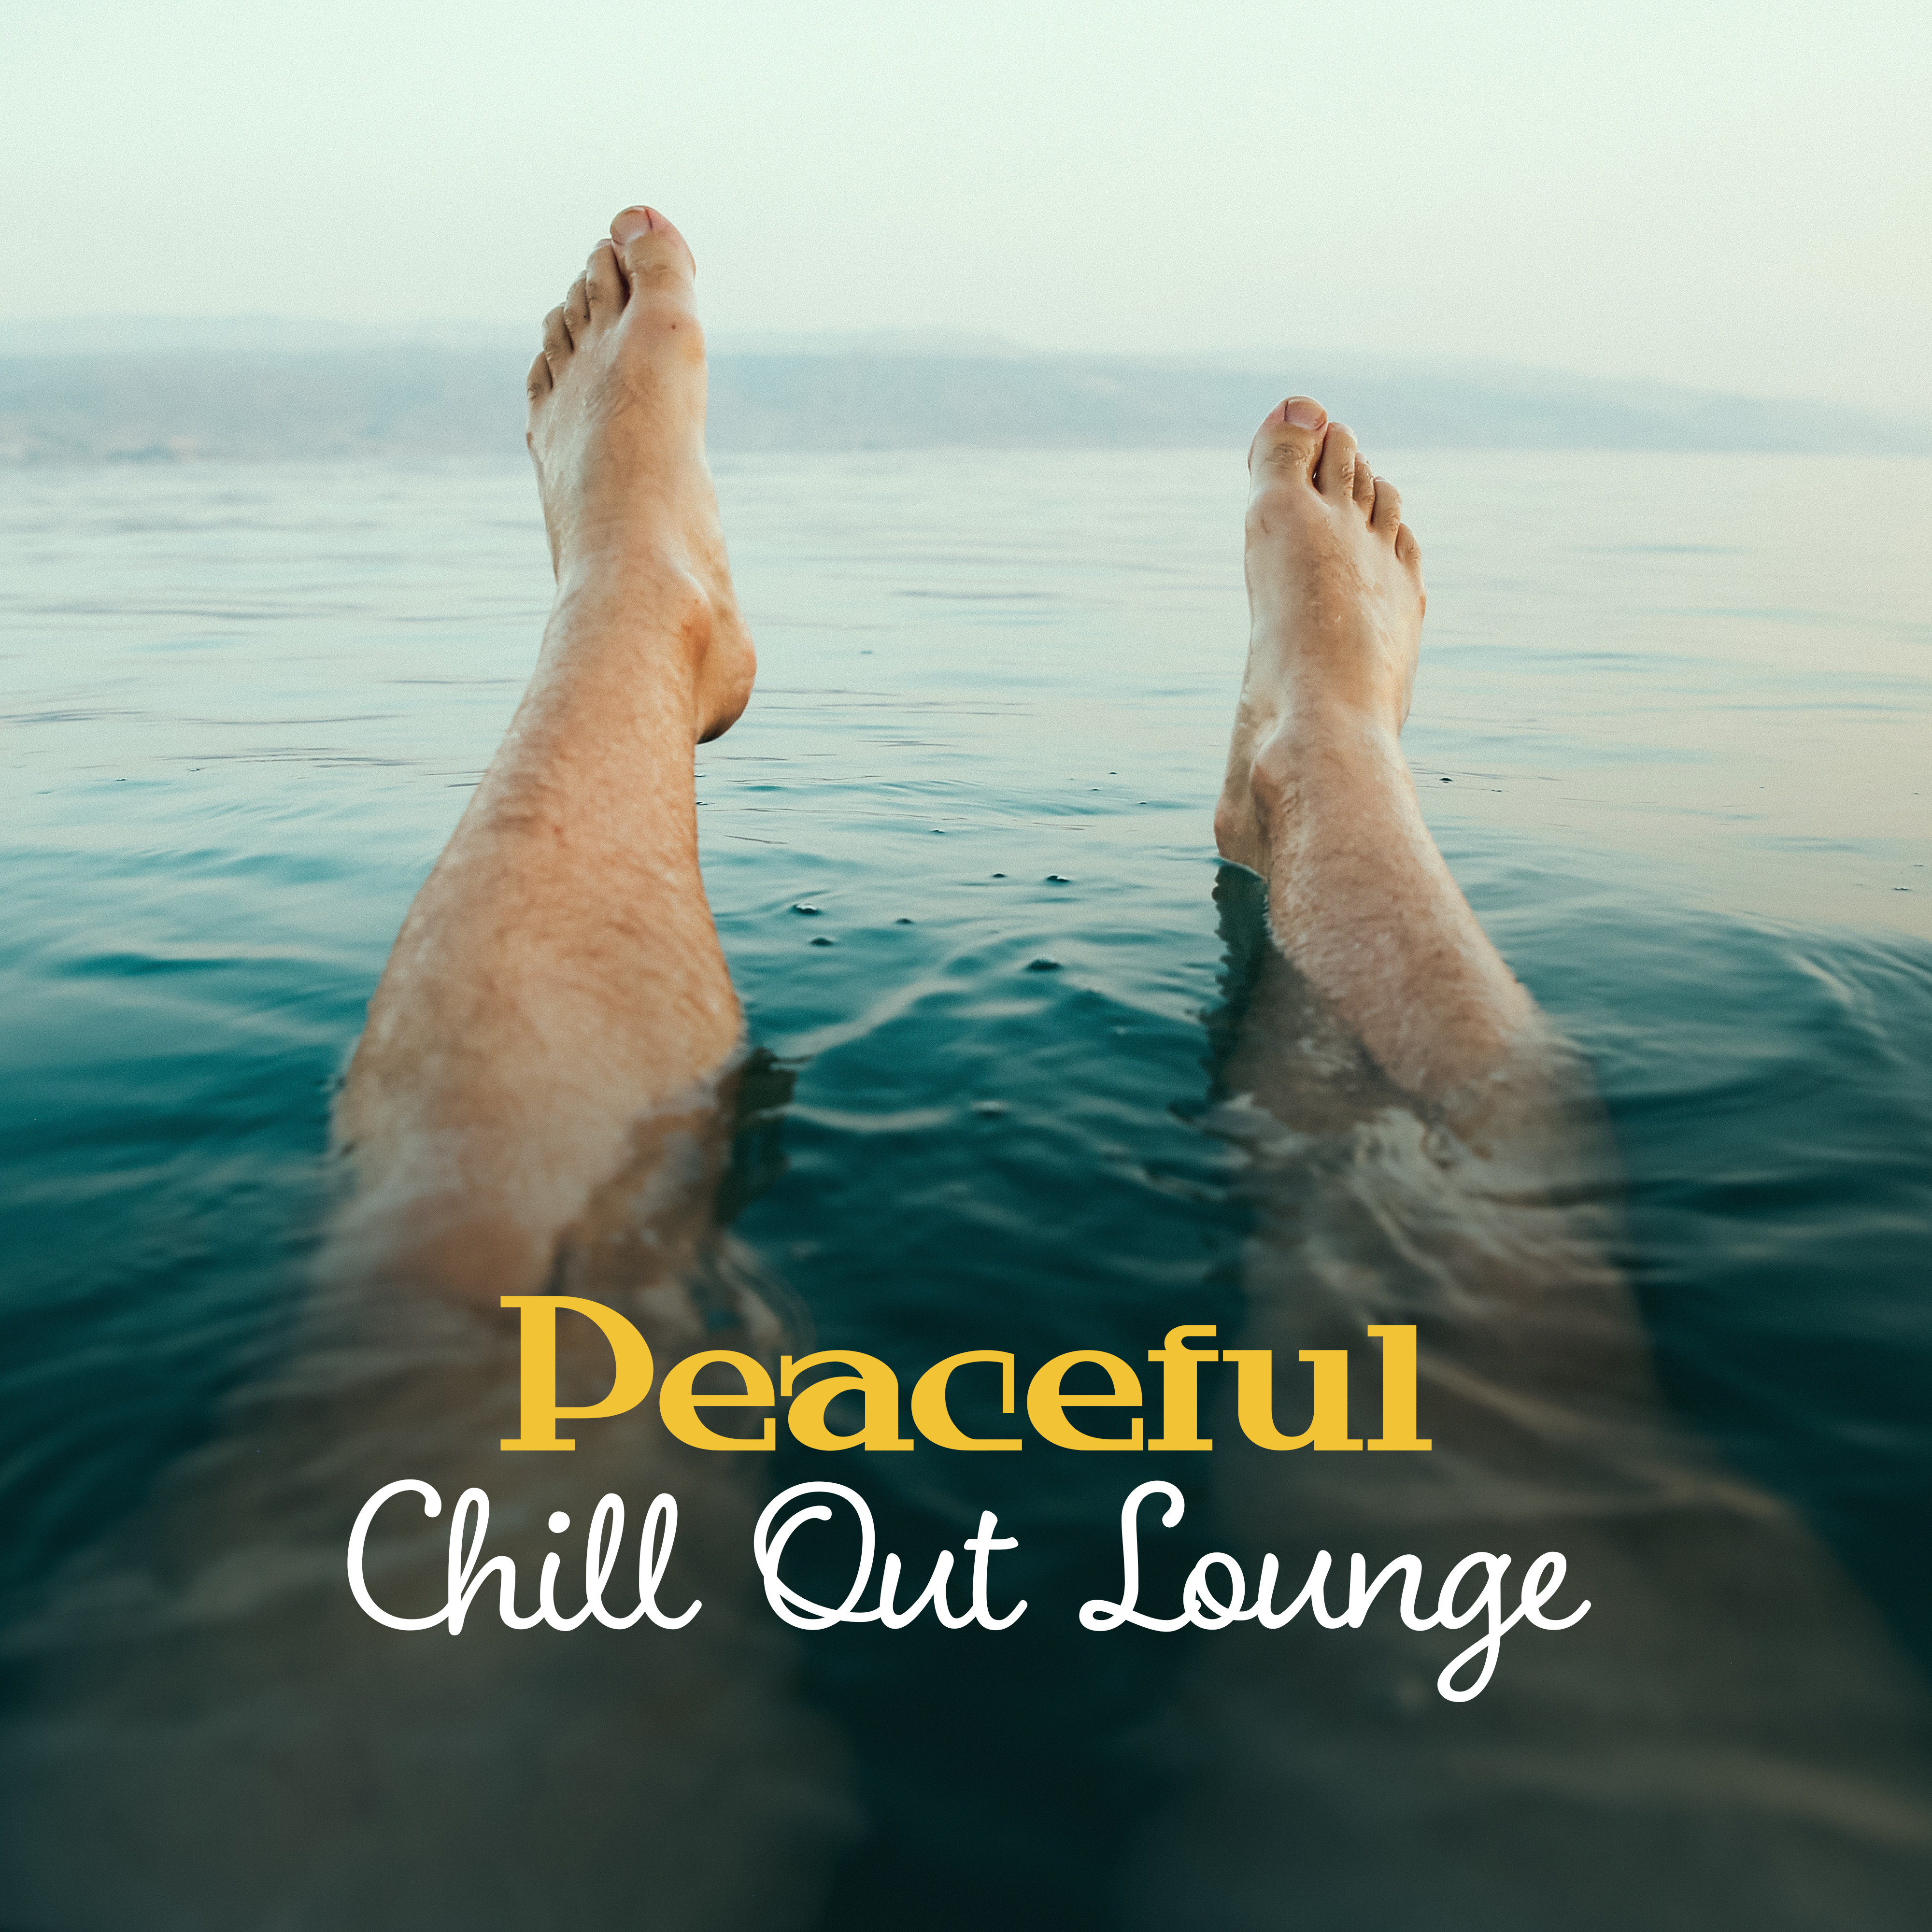 Peaceful Chill Out Lounge – Easy Listening, Stress Relief, Beach Relaxation, Calming Vibes